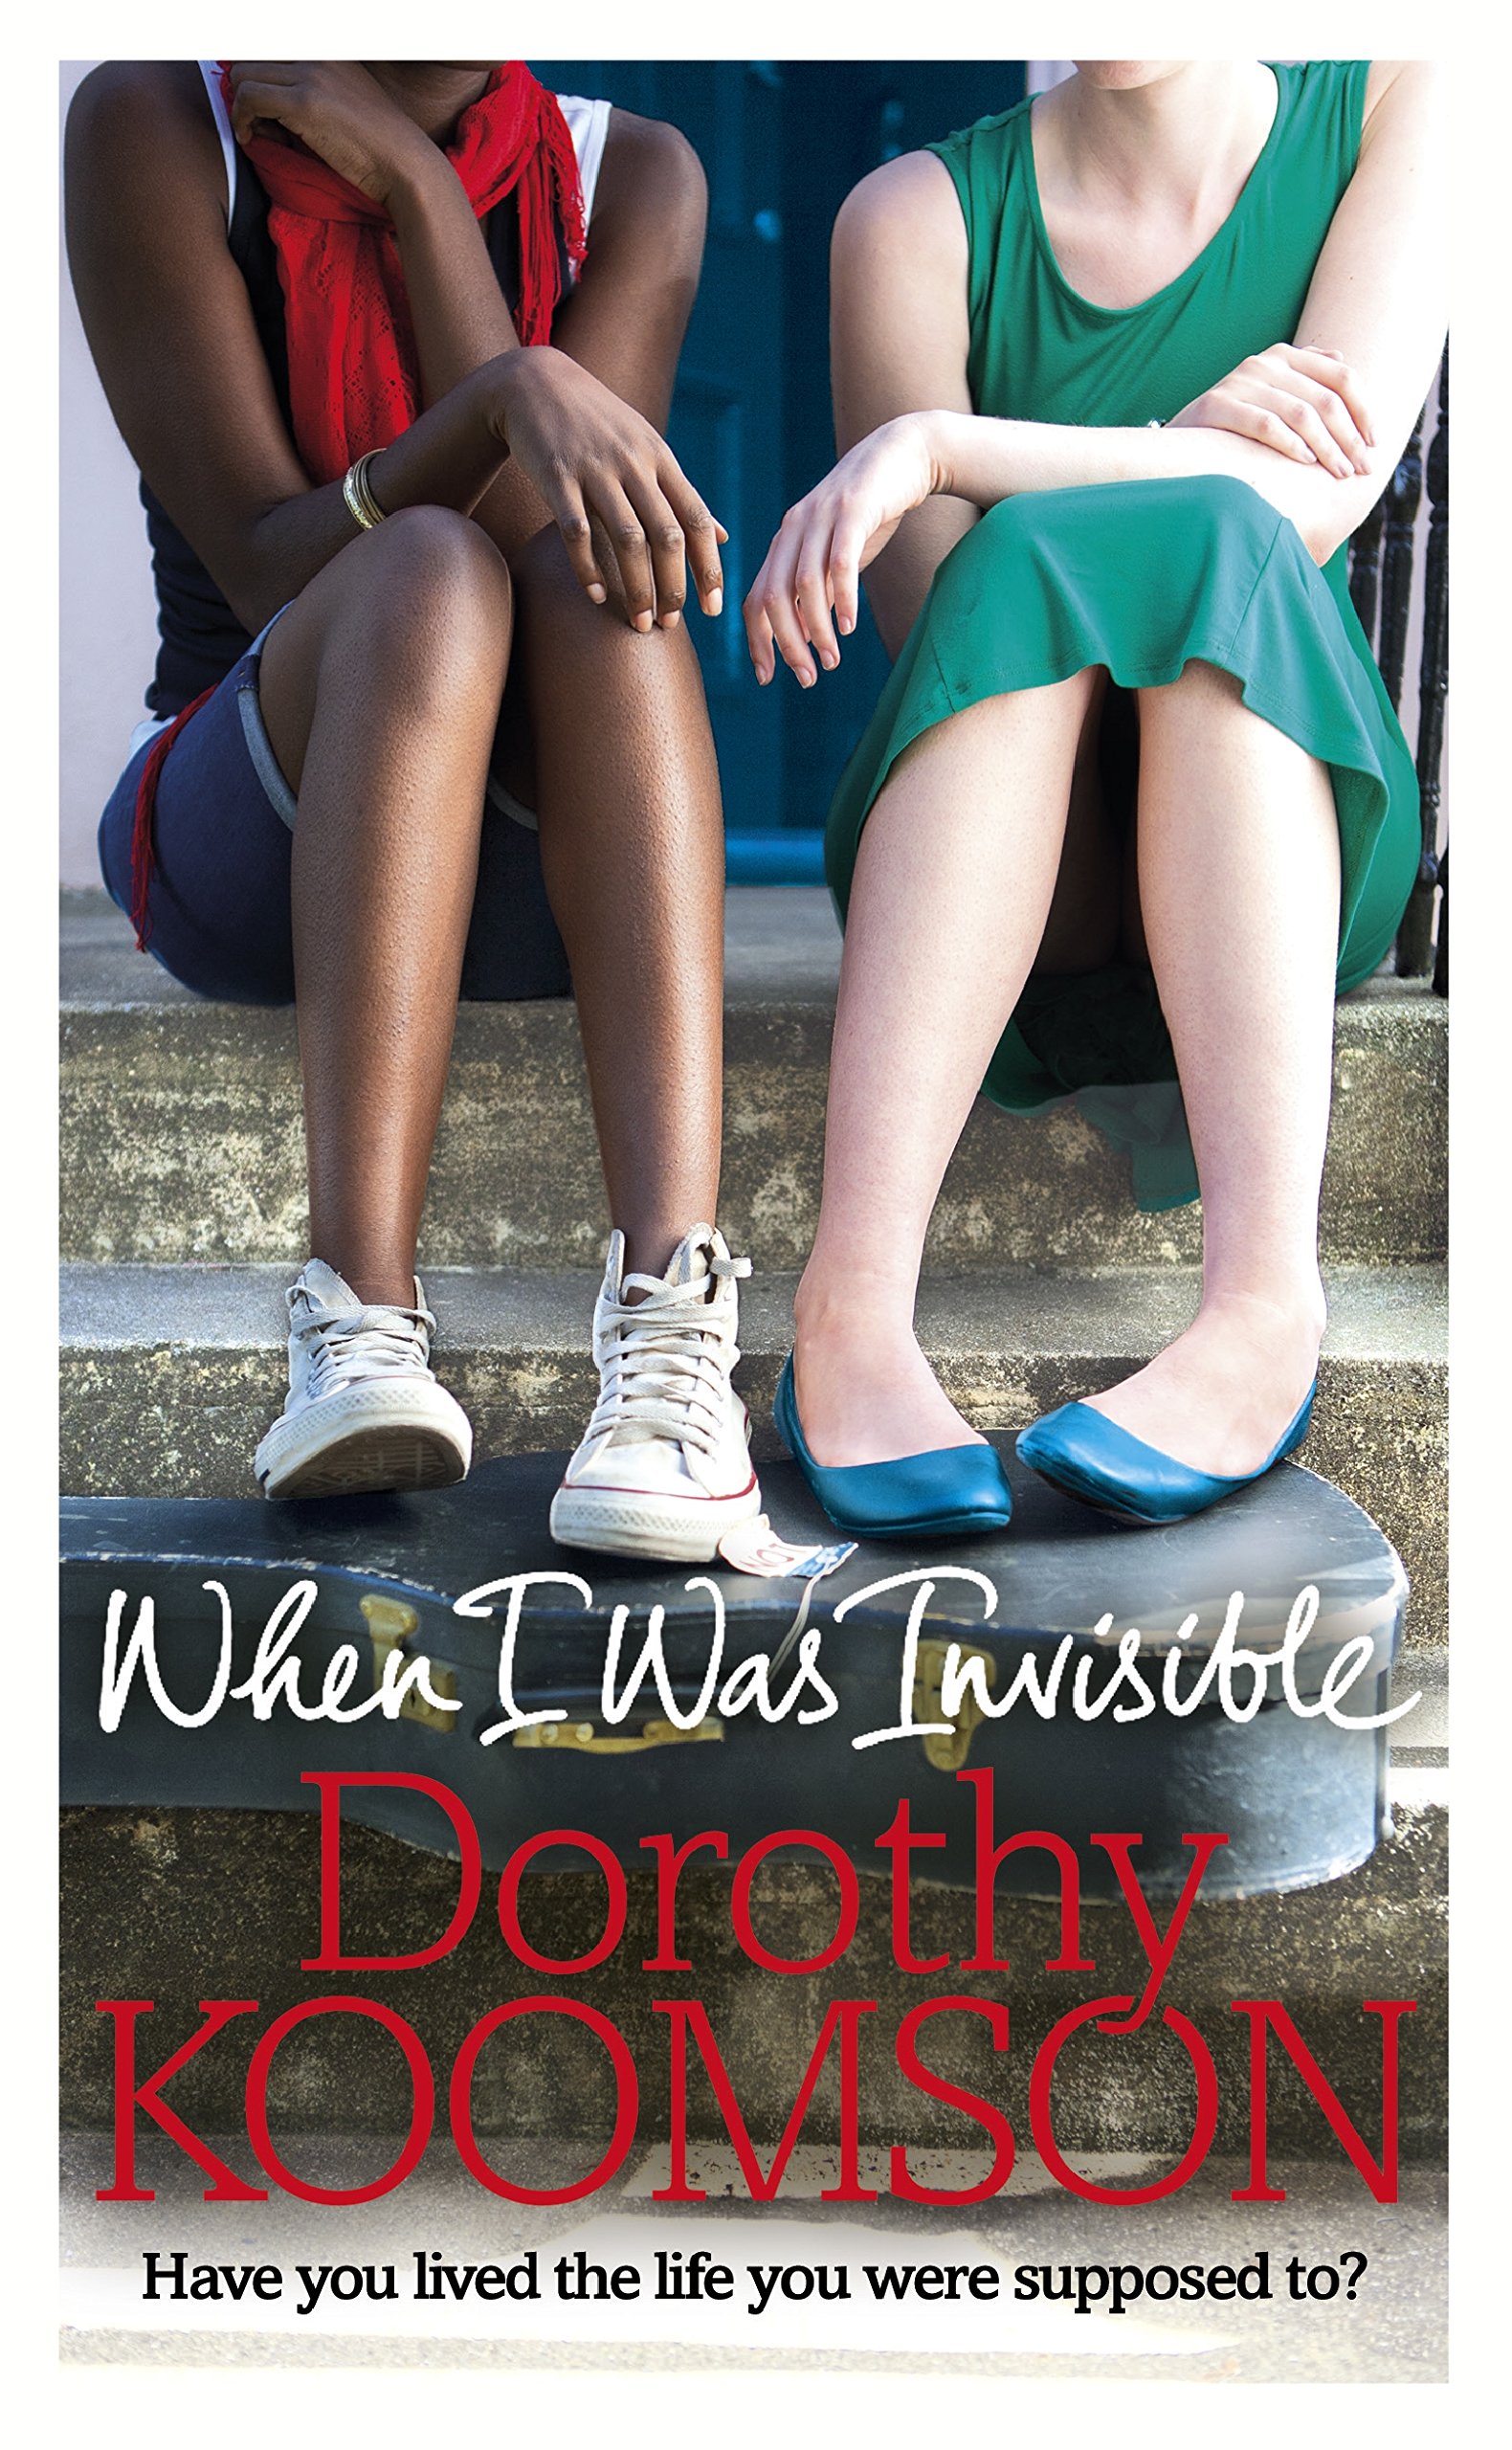 When I Was Invisible - Dorothy Koomson